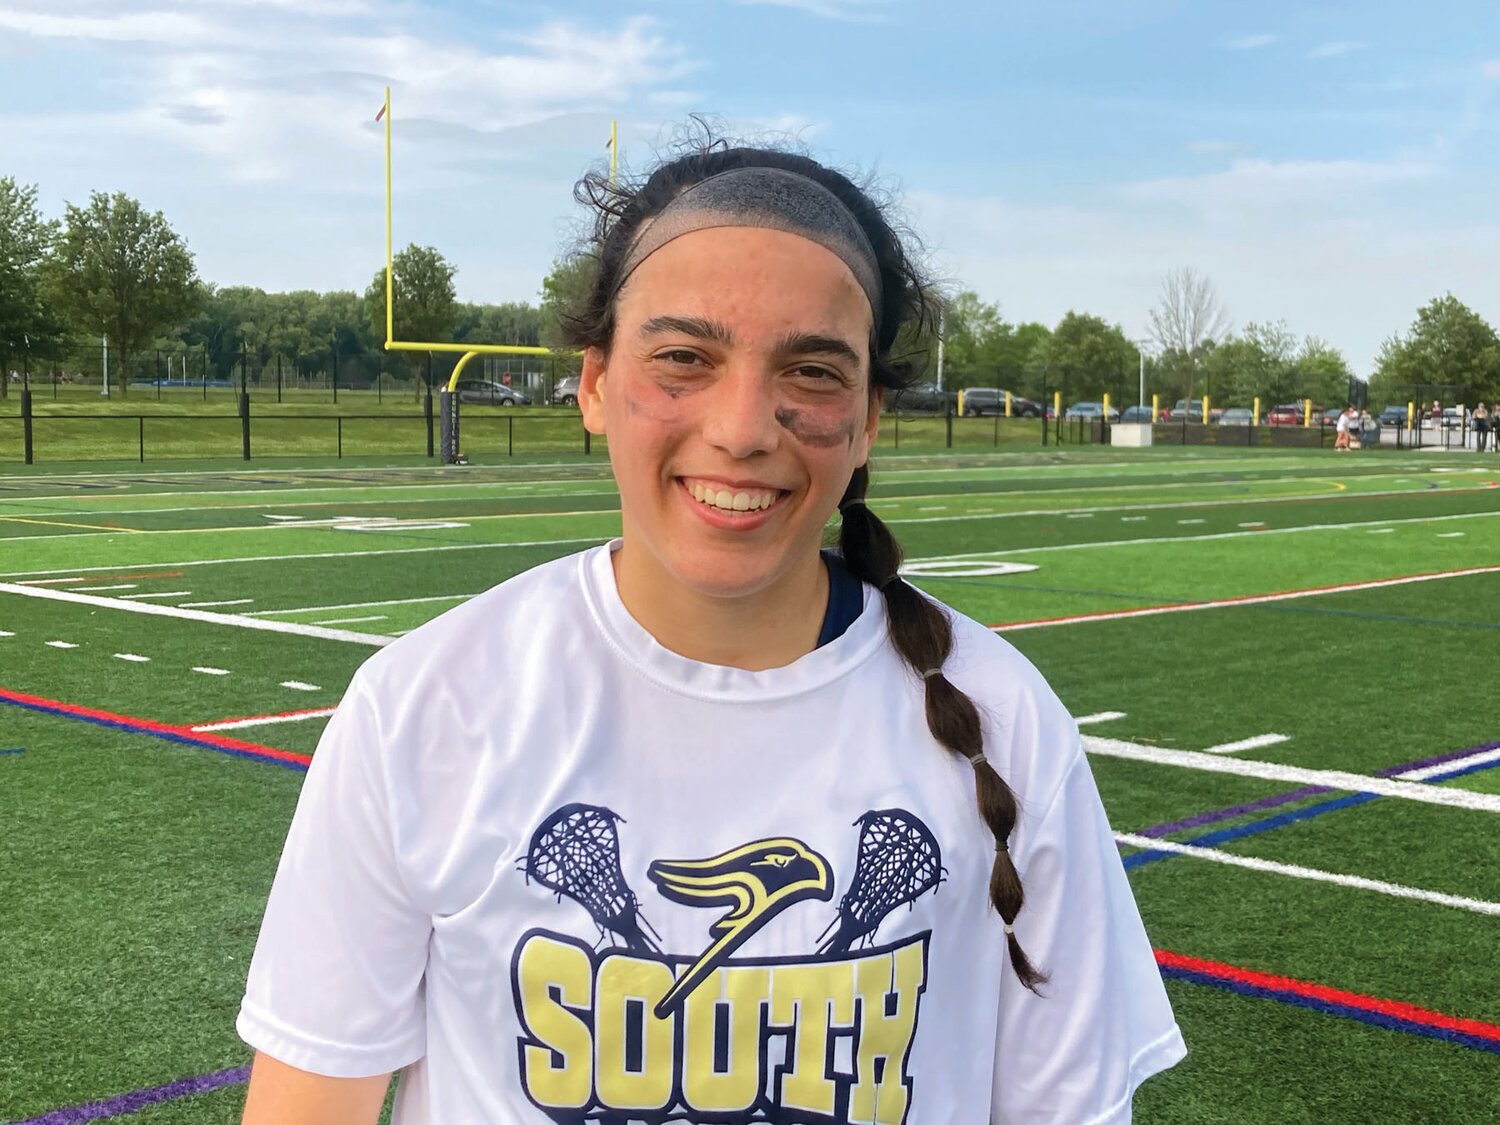 Karissa Smedley had two goals and two assists in an 11-10 loss to Lower Merion.